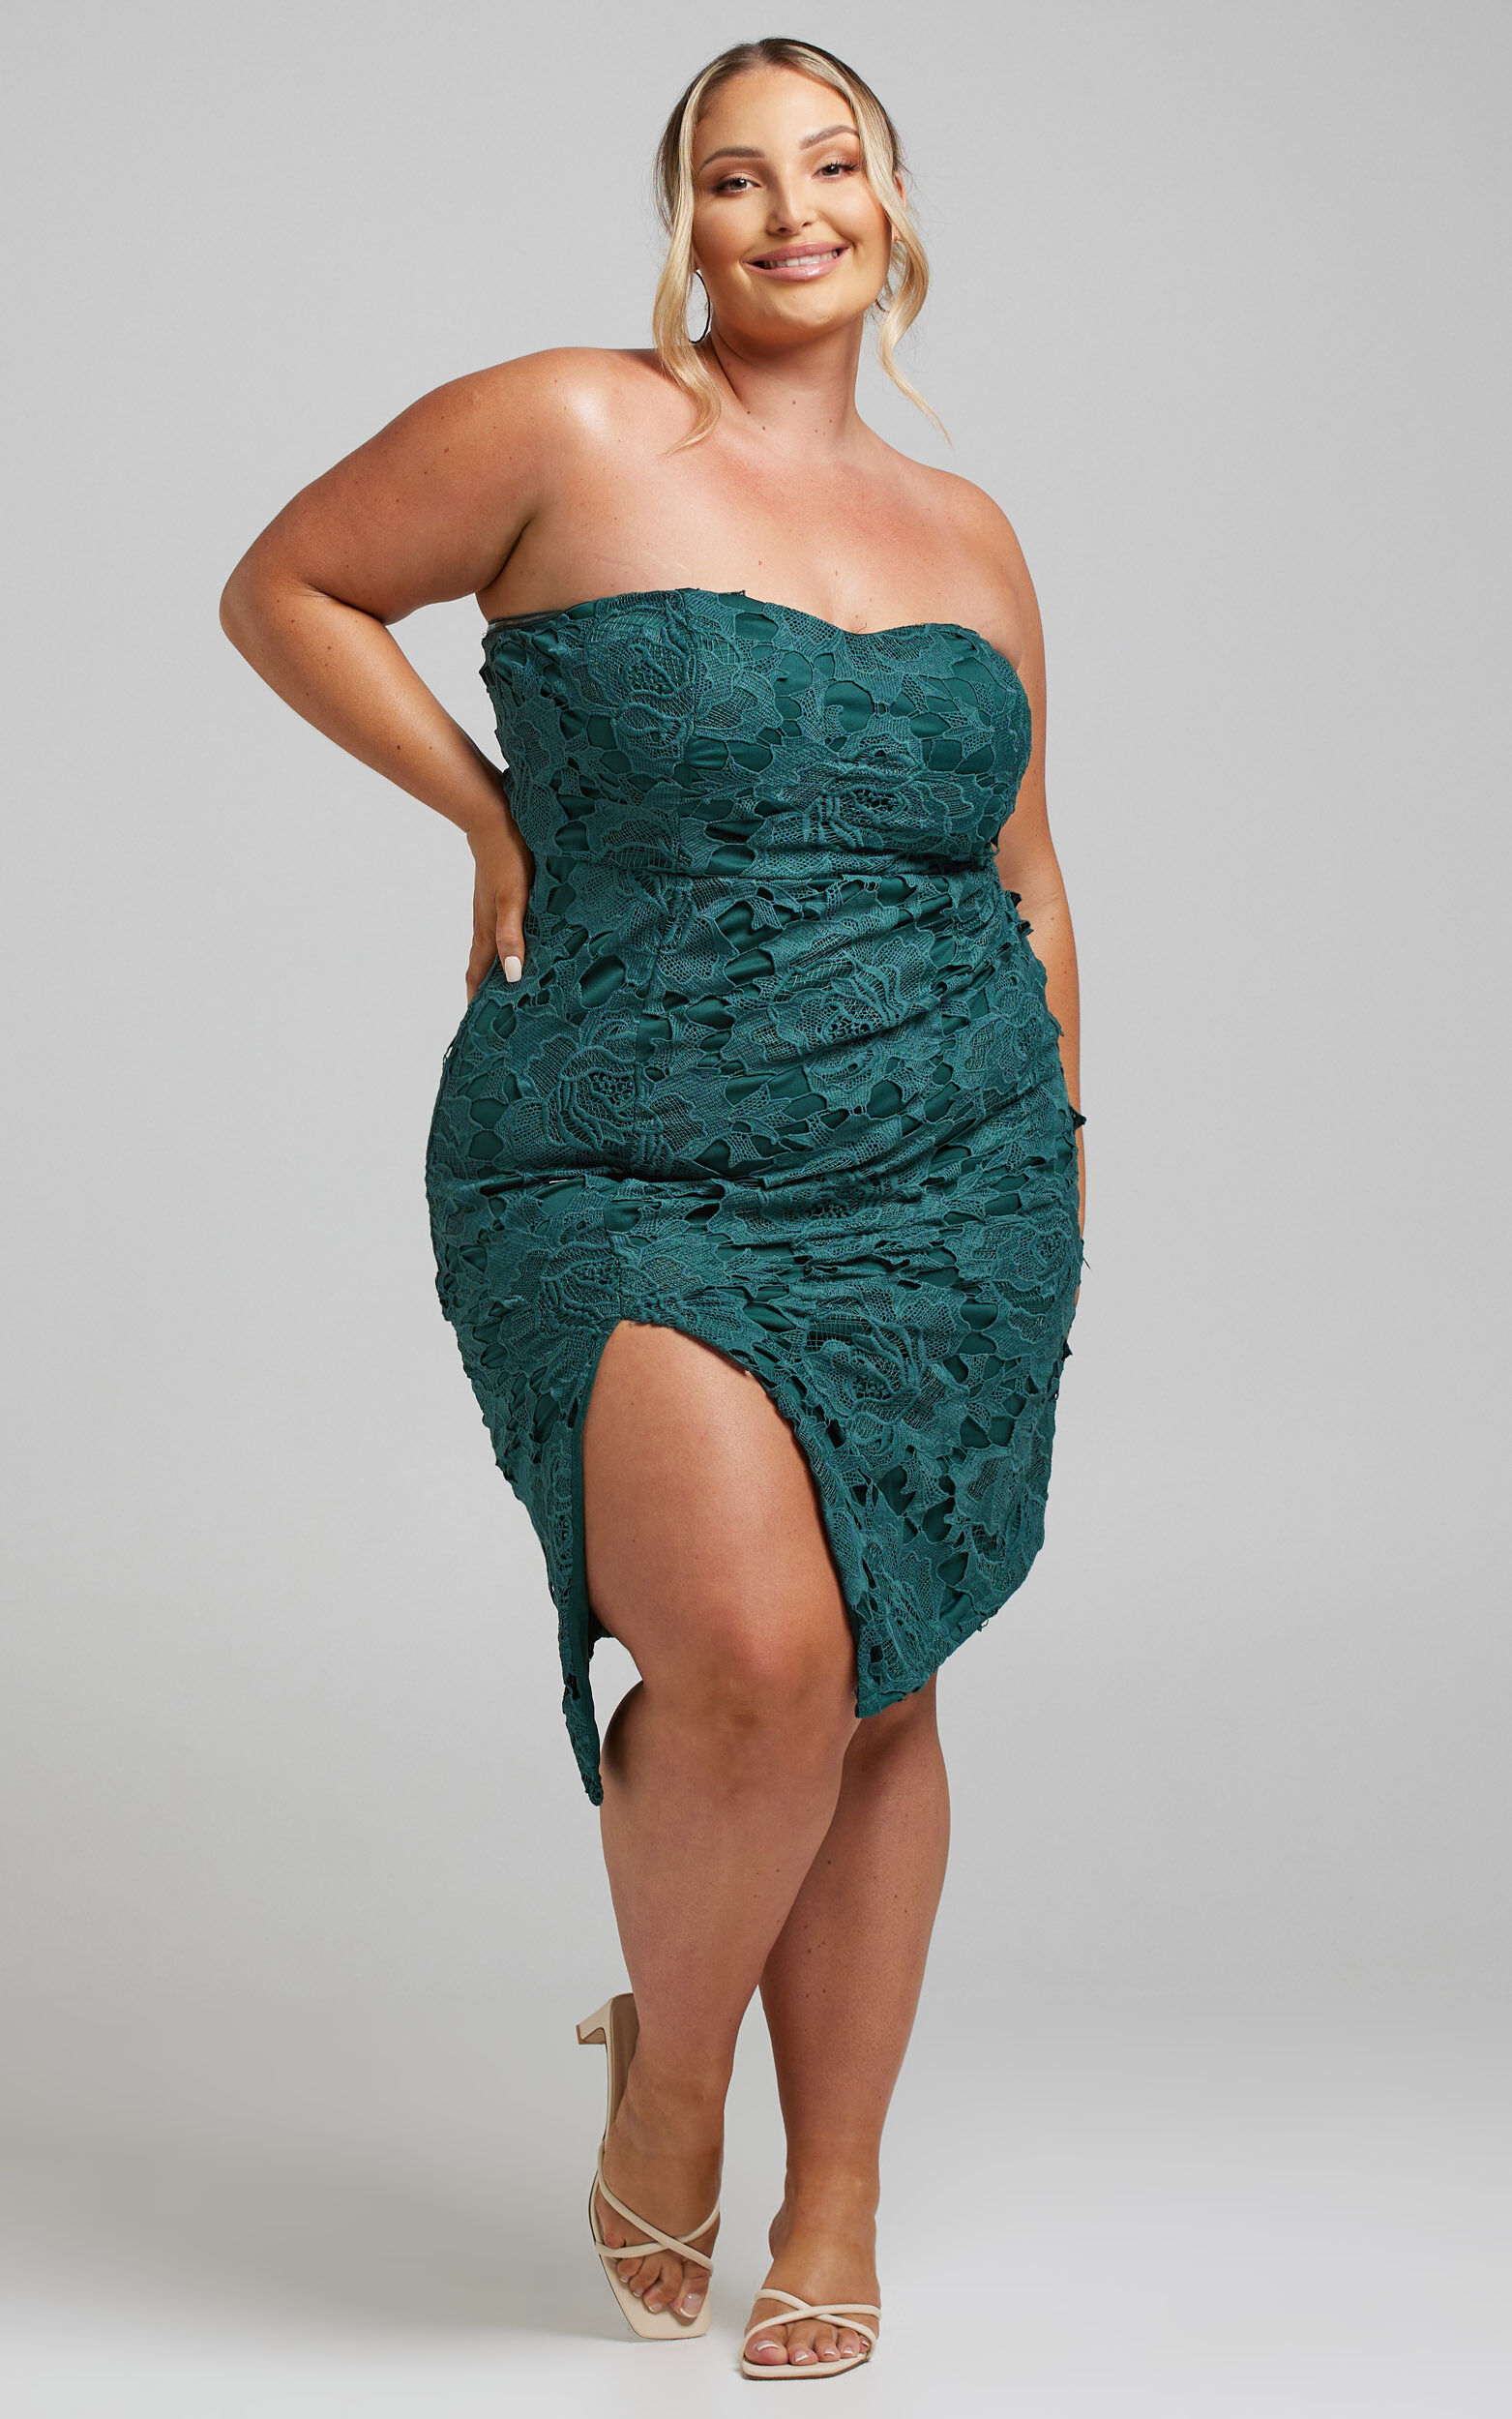 Lace To Lace Dress in Emerald Lace - 04, GRN3, super-hi-res image number null